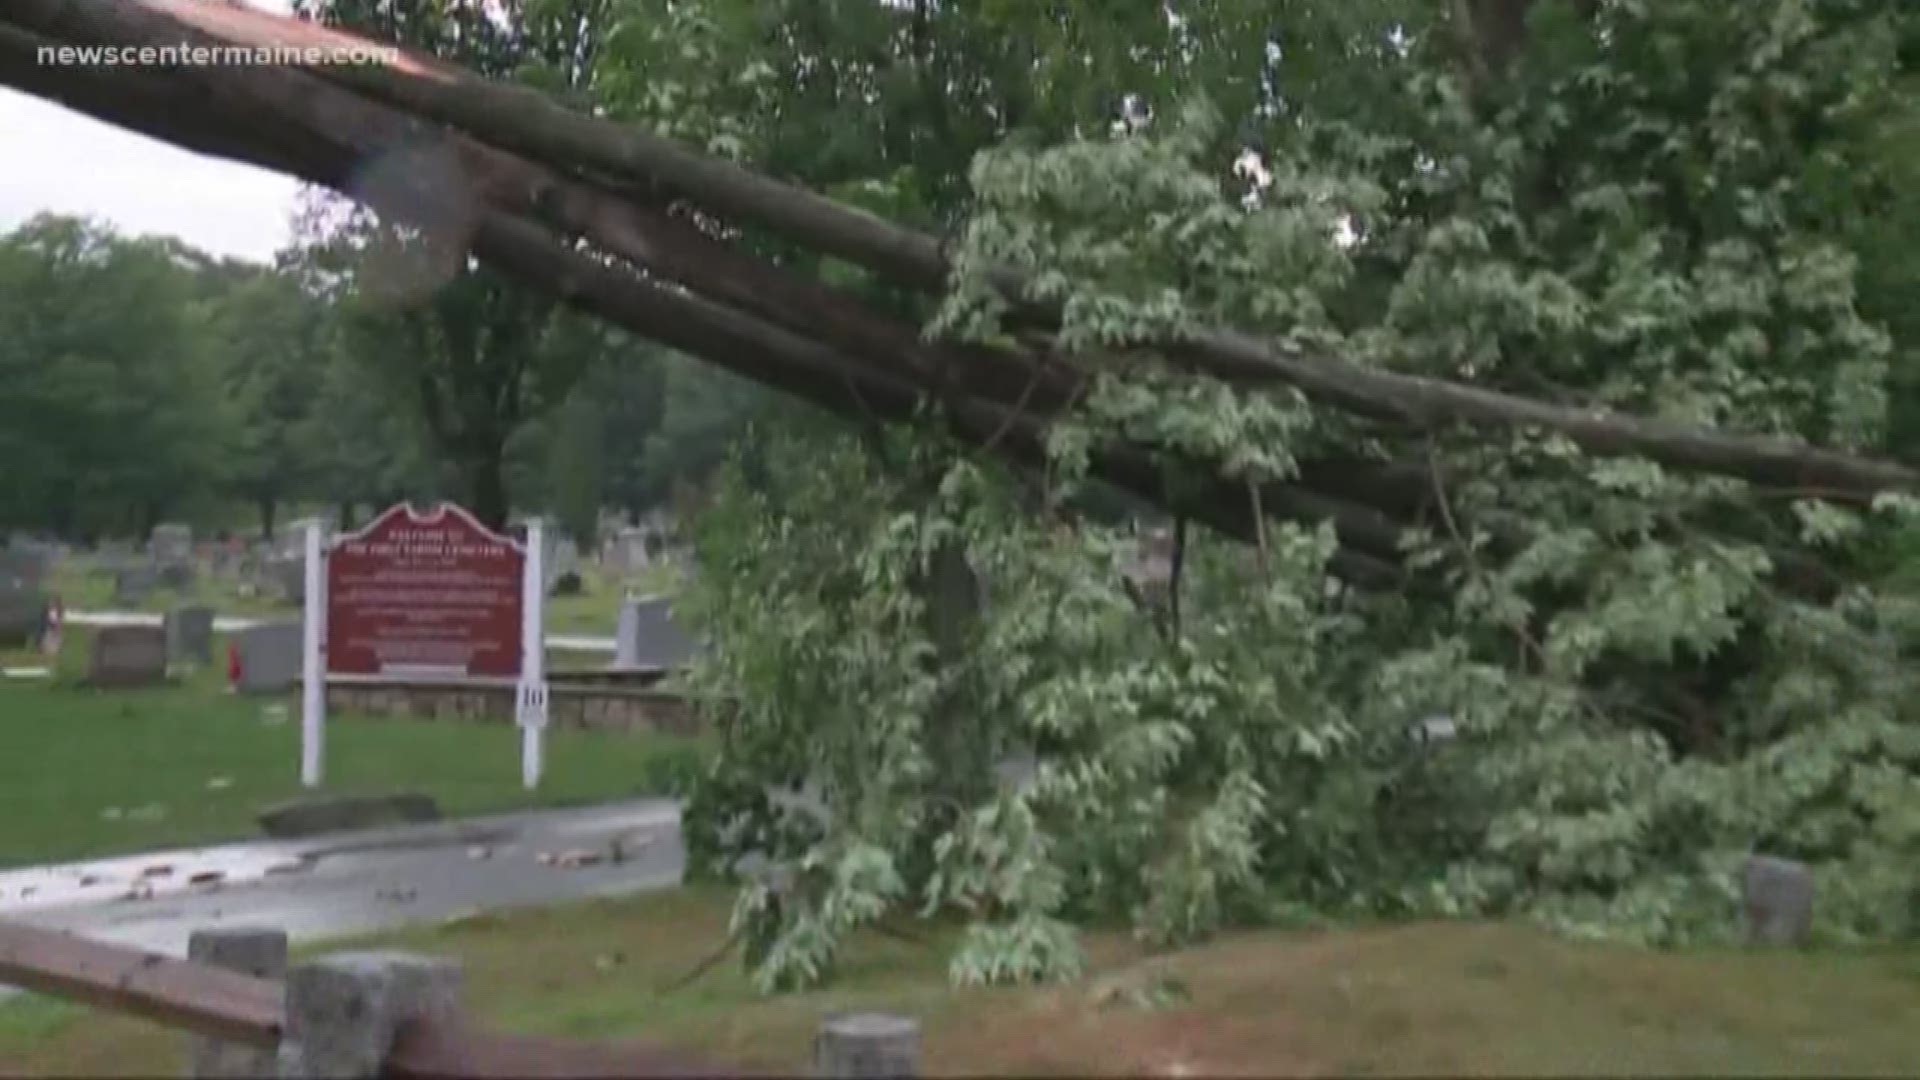 Storms across southern Maine and parts of N.H. on Wednesday, July 31 have caused damage in some areas.